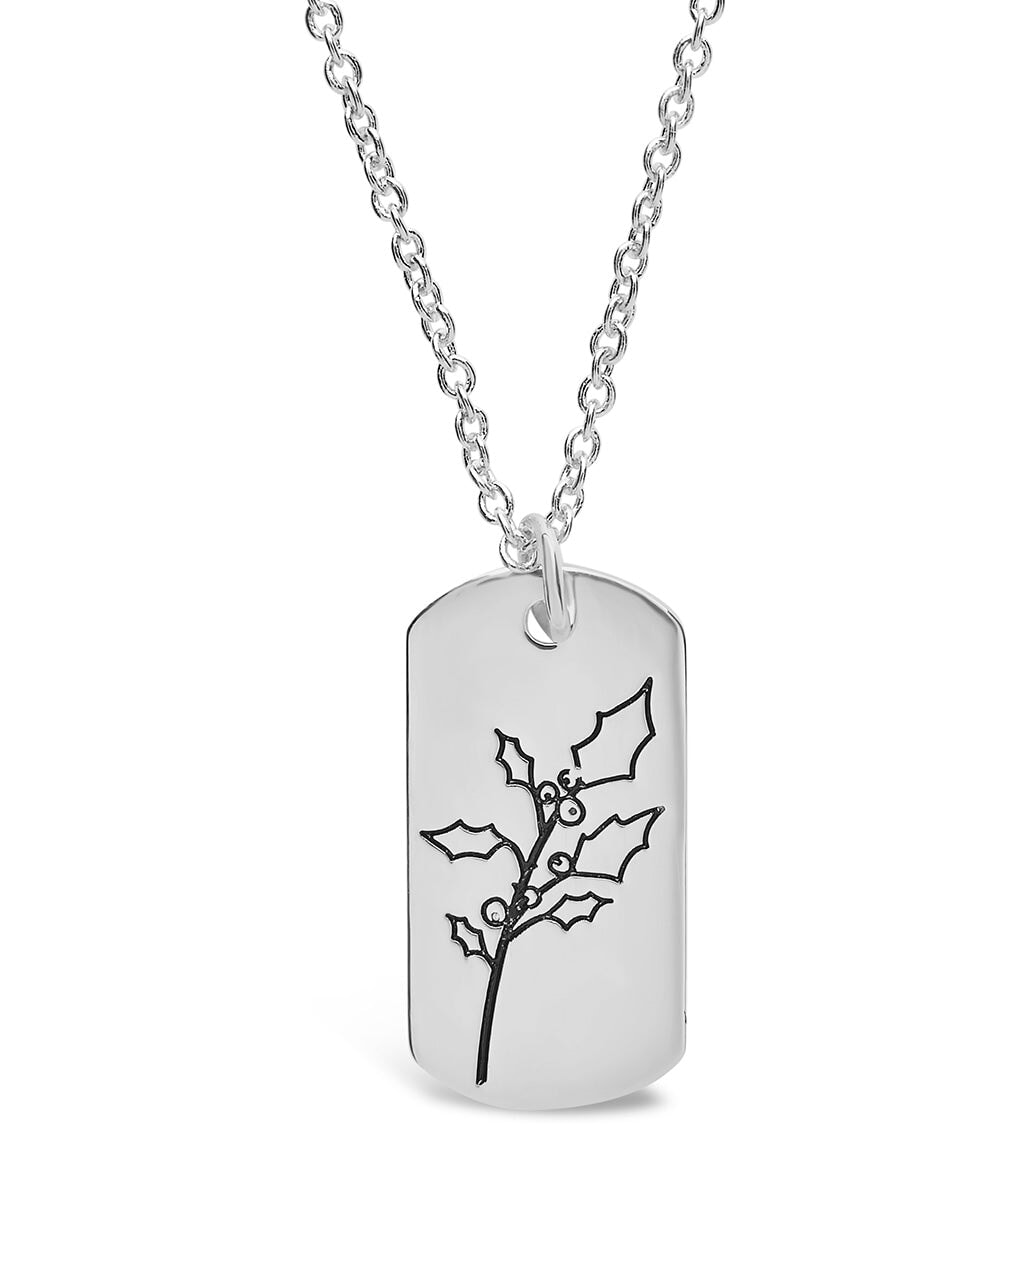 Birth Flower Pendant Necklace Sterling Forever Silver December / Holly 